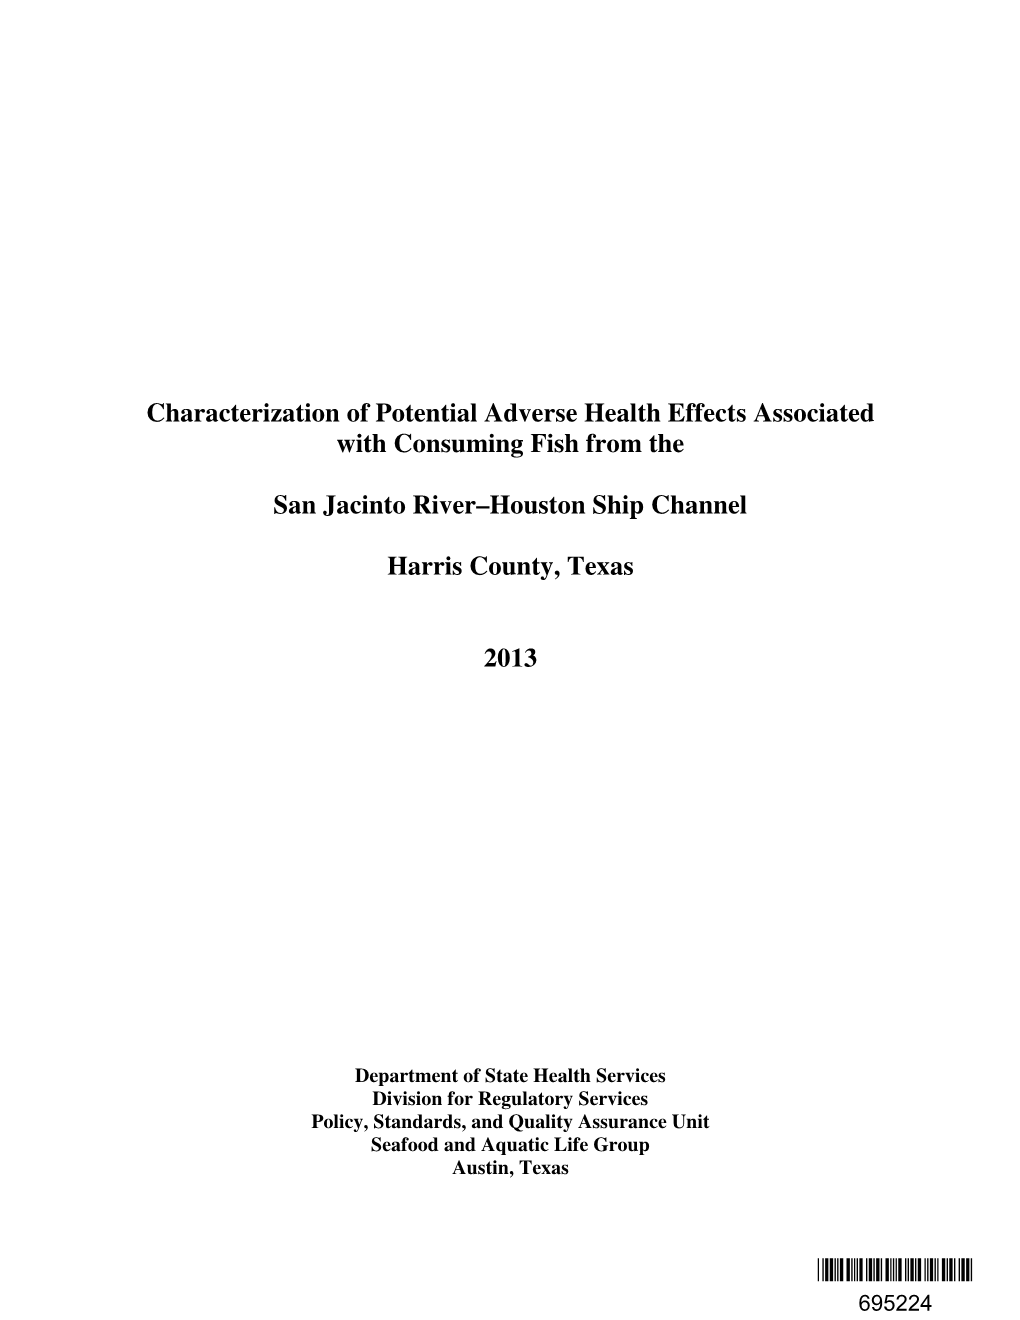 Characterization of Potential Adverse Health Effects Associated with Consuming Fish from The